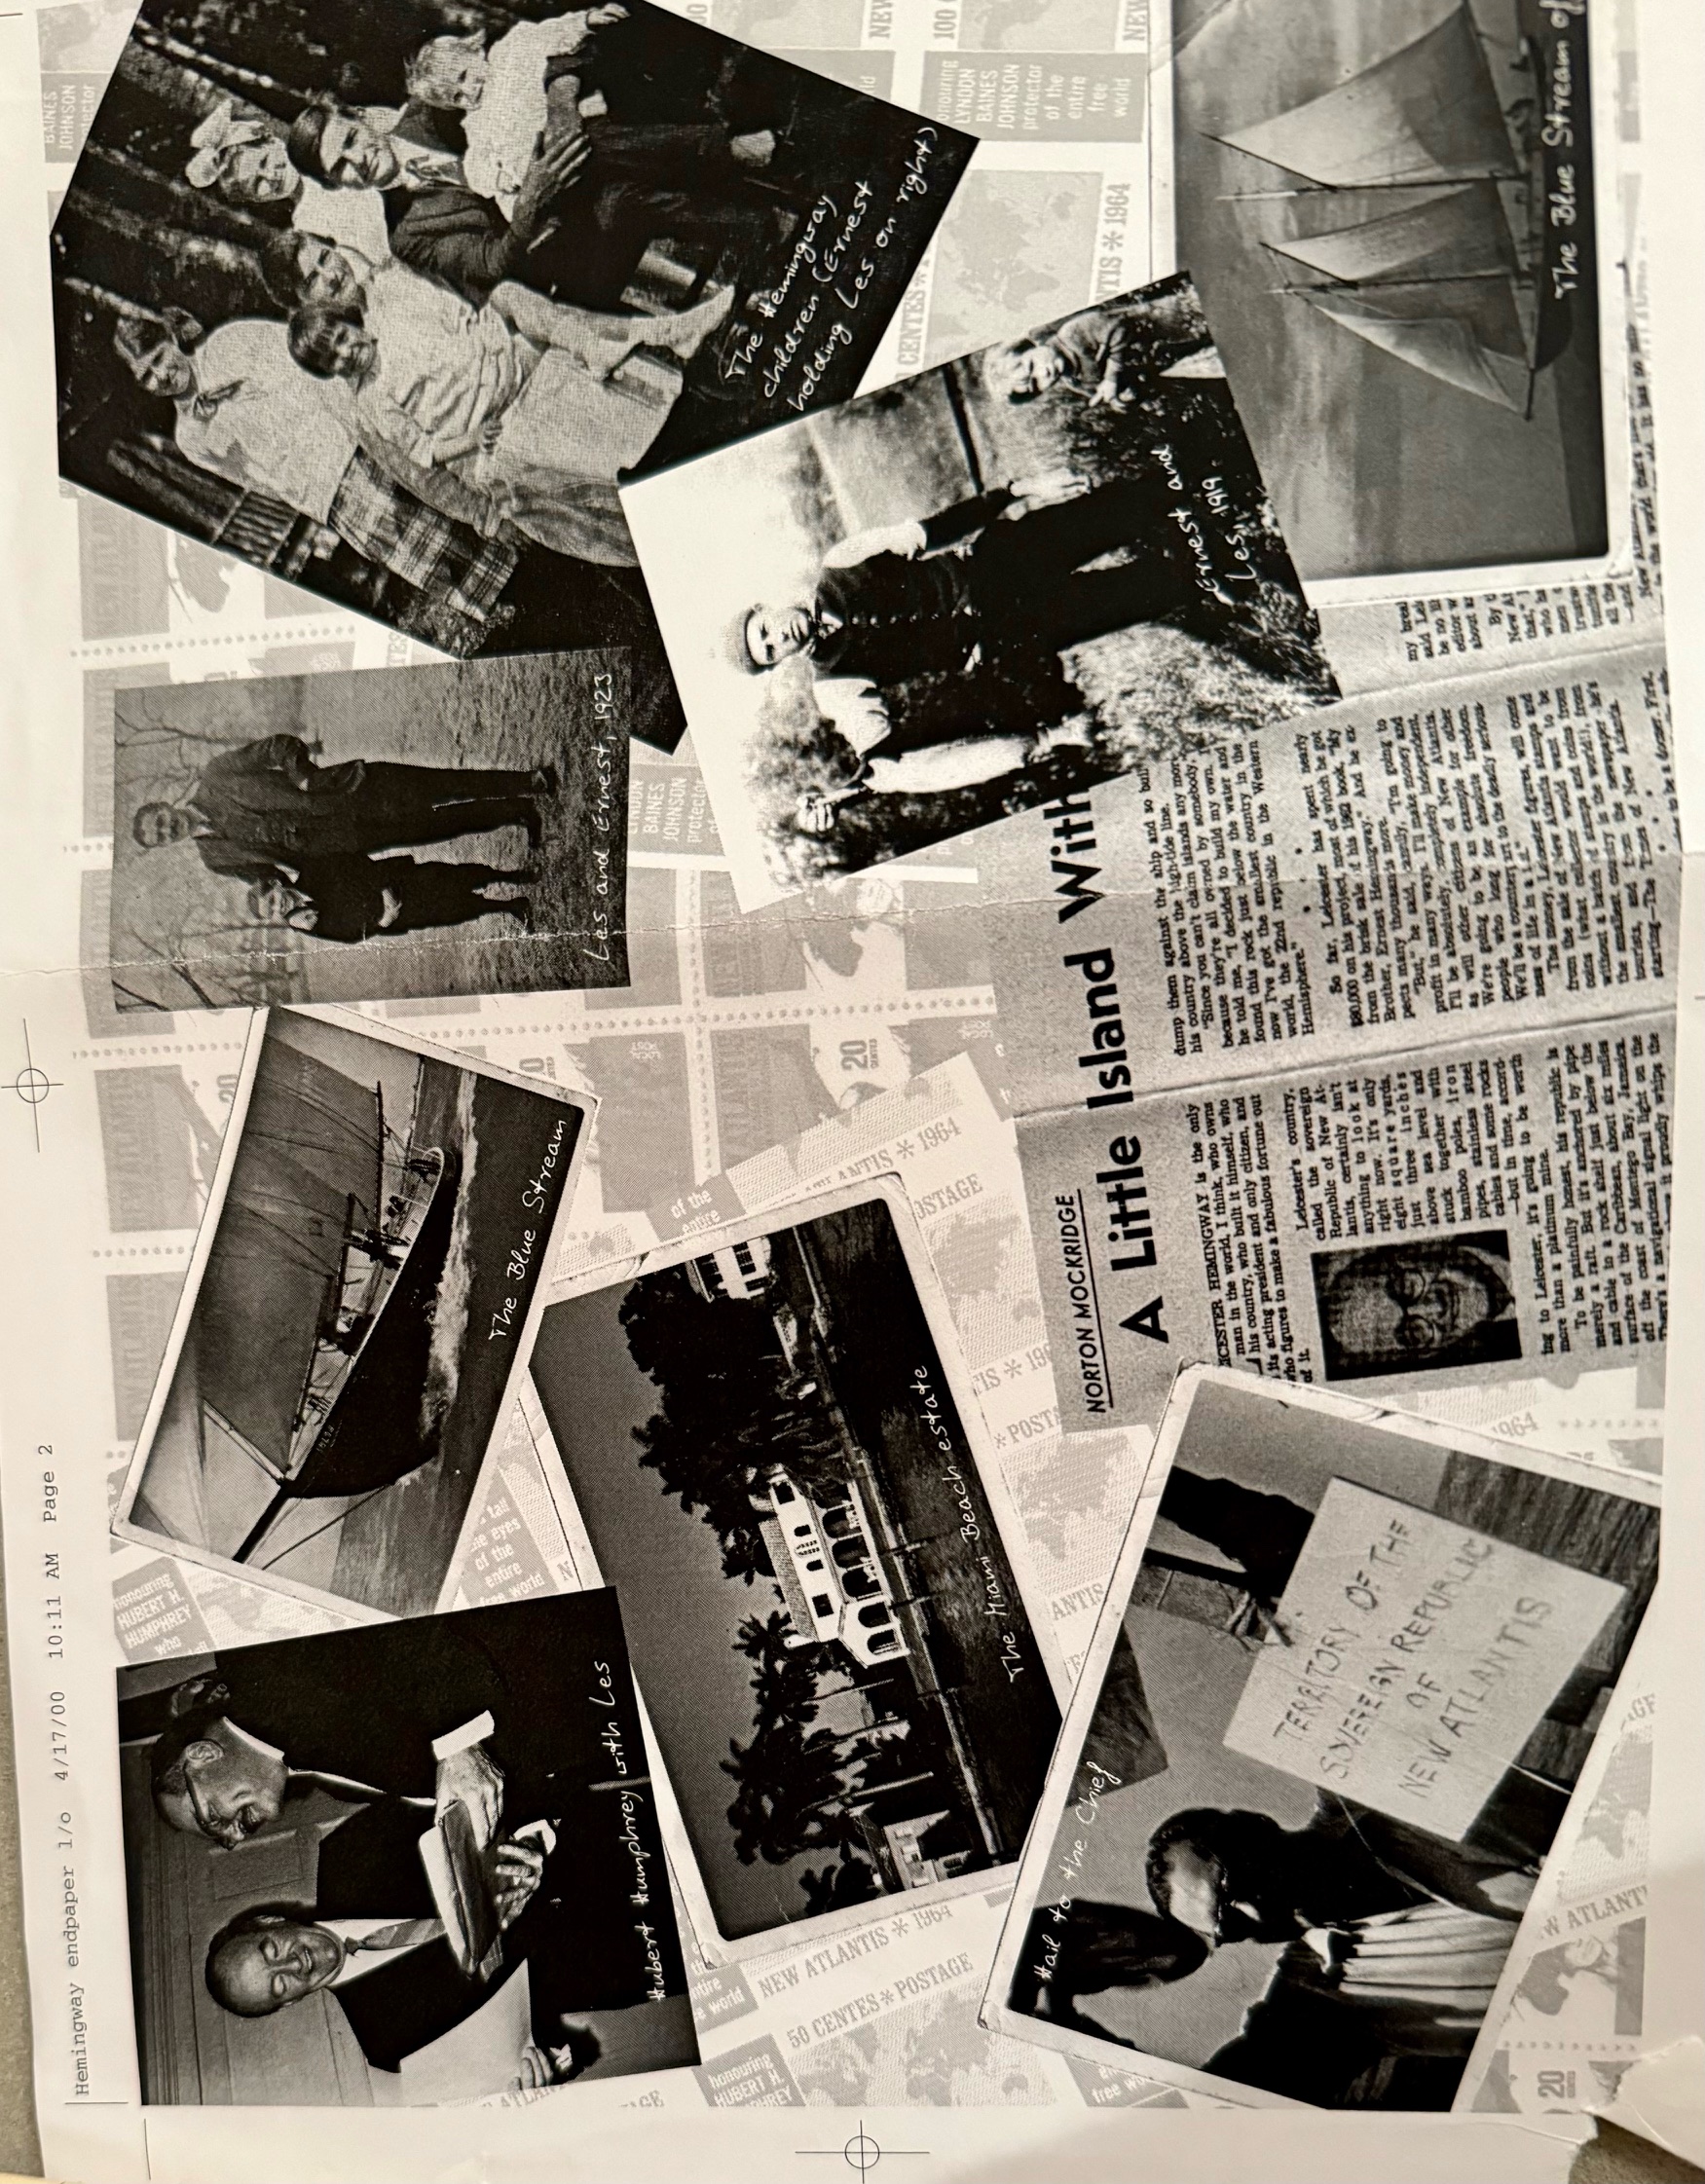 A collage of photos and newspaper clippings about Leicester's life